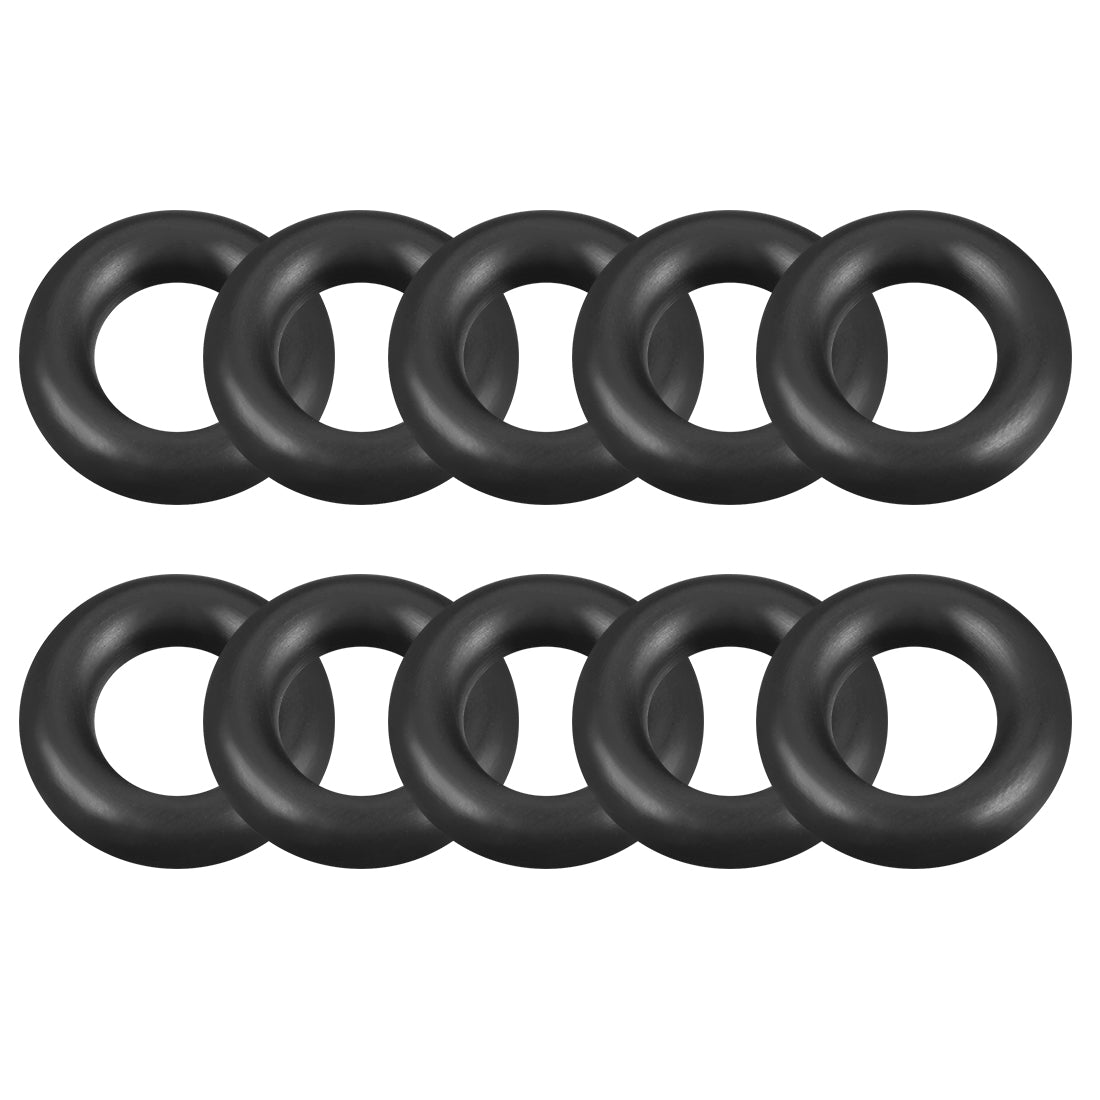 uxcell Uxcell O-Rings Nitrile Rubber 10mm x 20mm x 5mm Seal Rings Sealing Gasket 10pcs